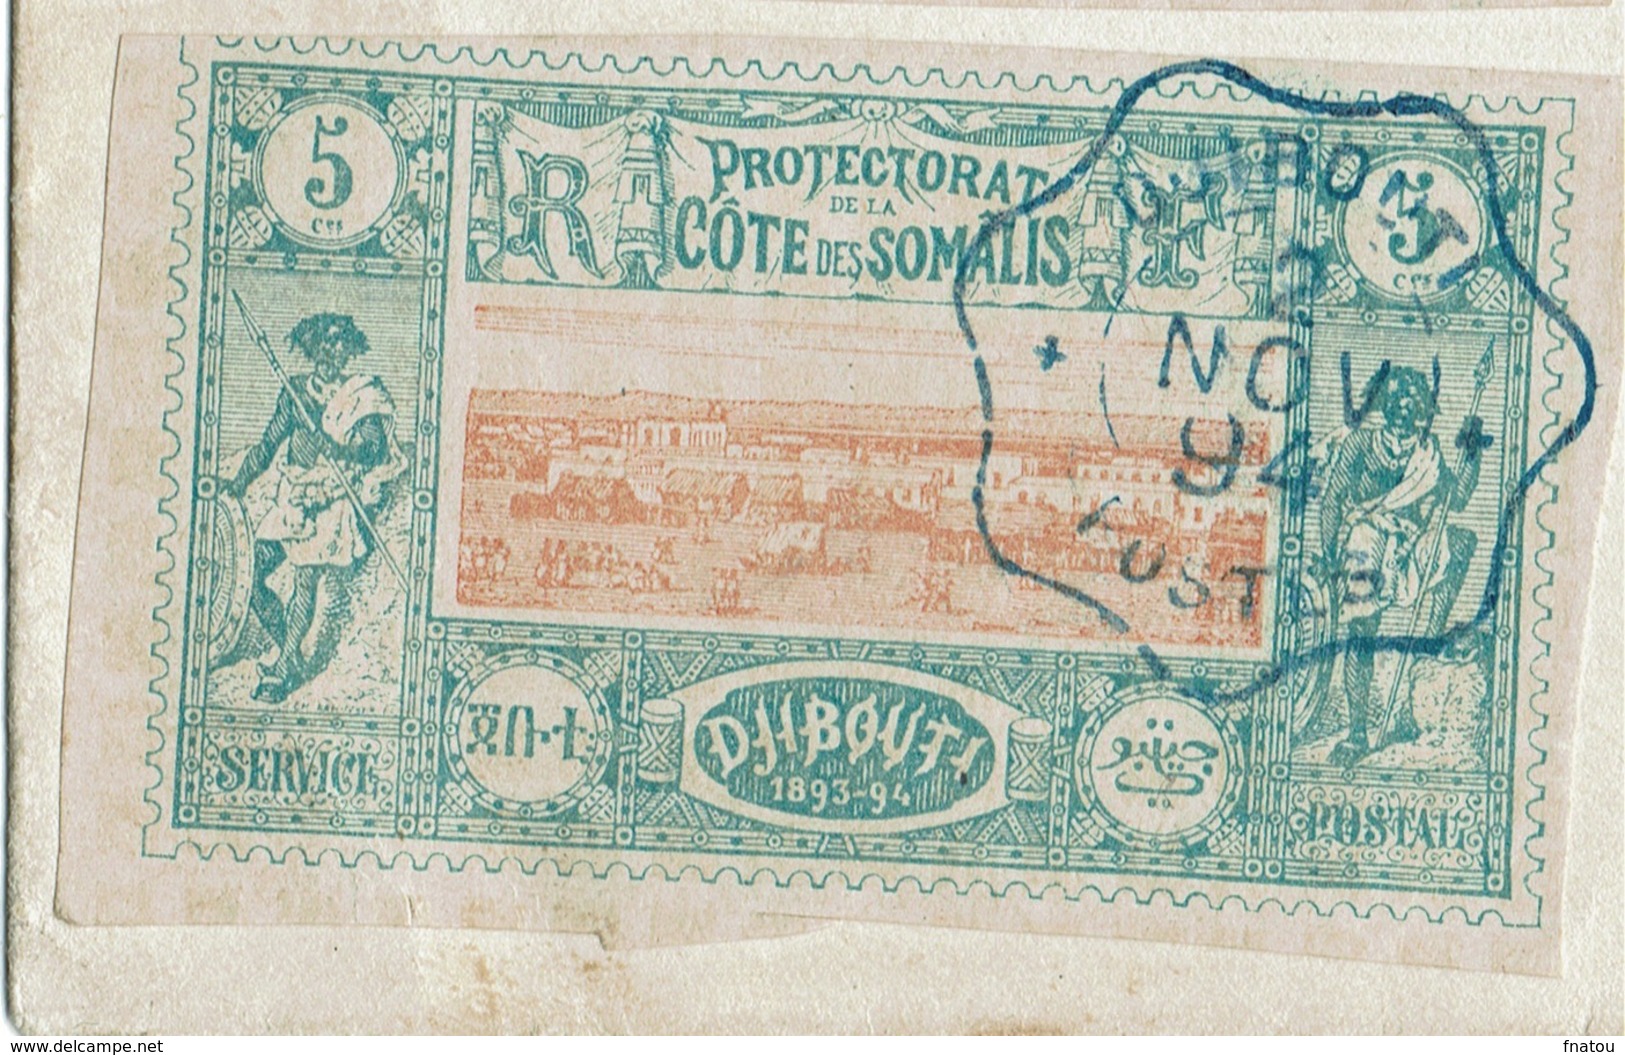 French Somali Coast, Awesome registered cover to Germany (Stadthagen), 1894, 13 stamps!!!